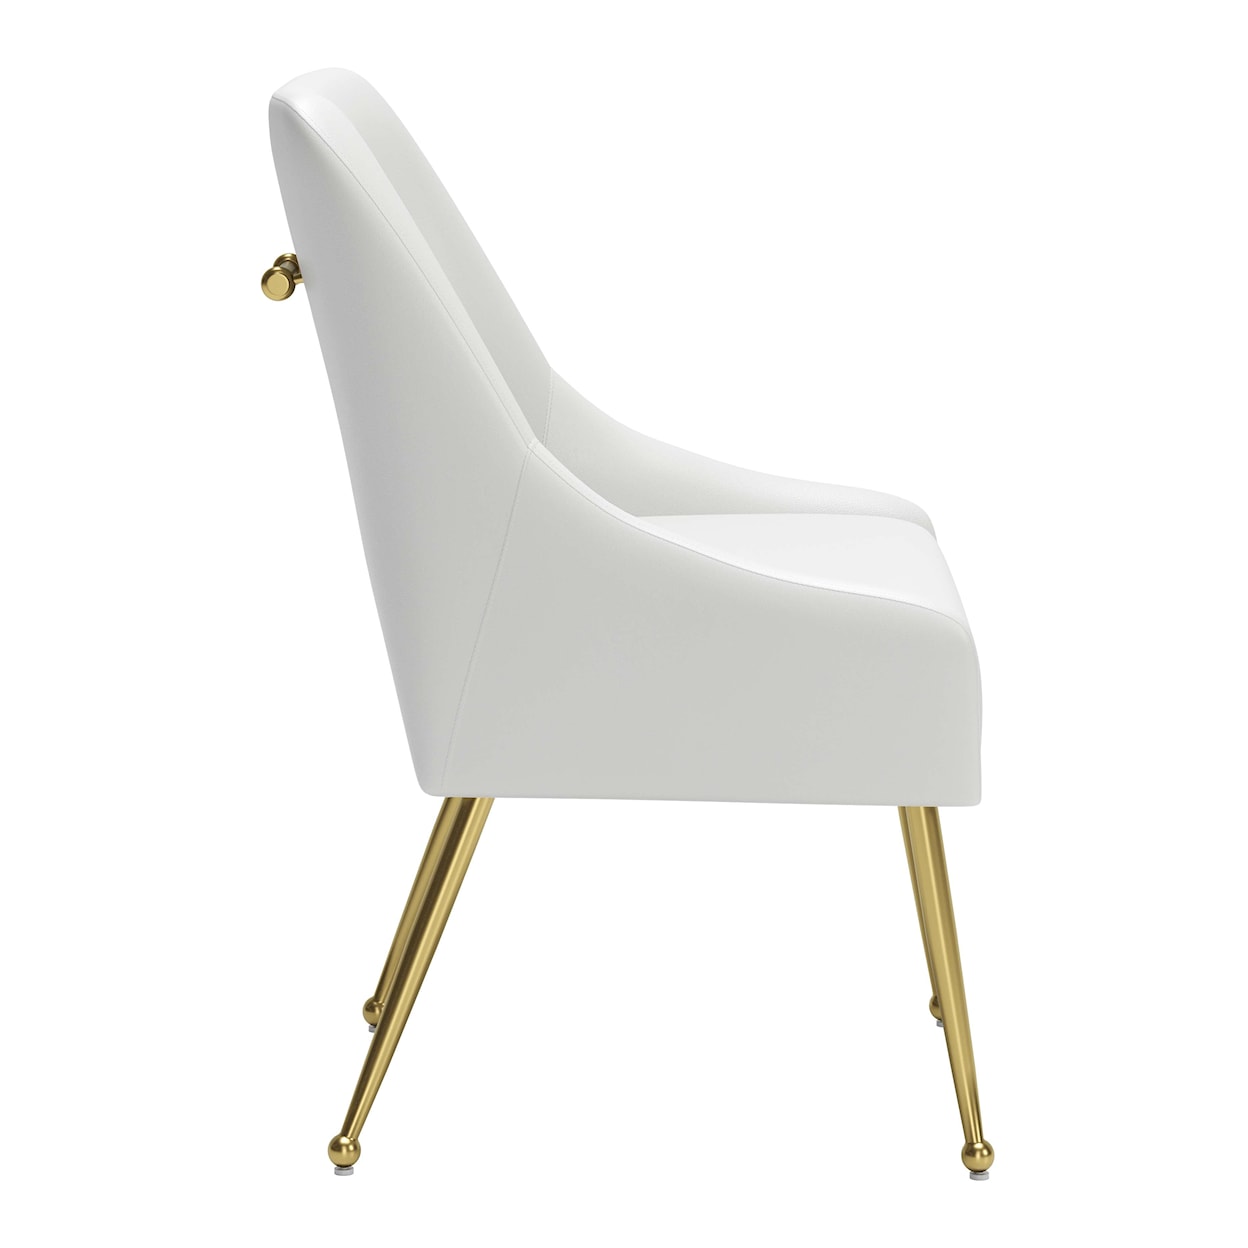 Zuo Maxine Dining Chair